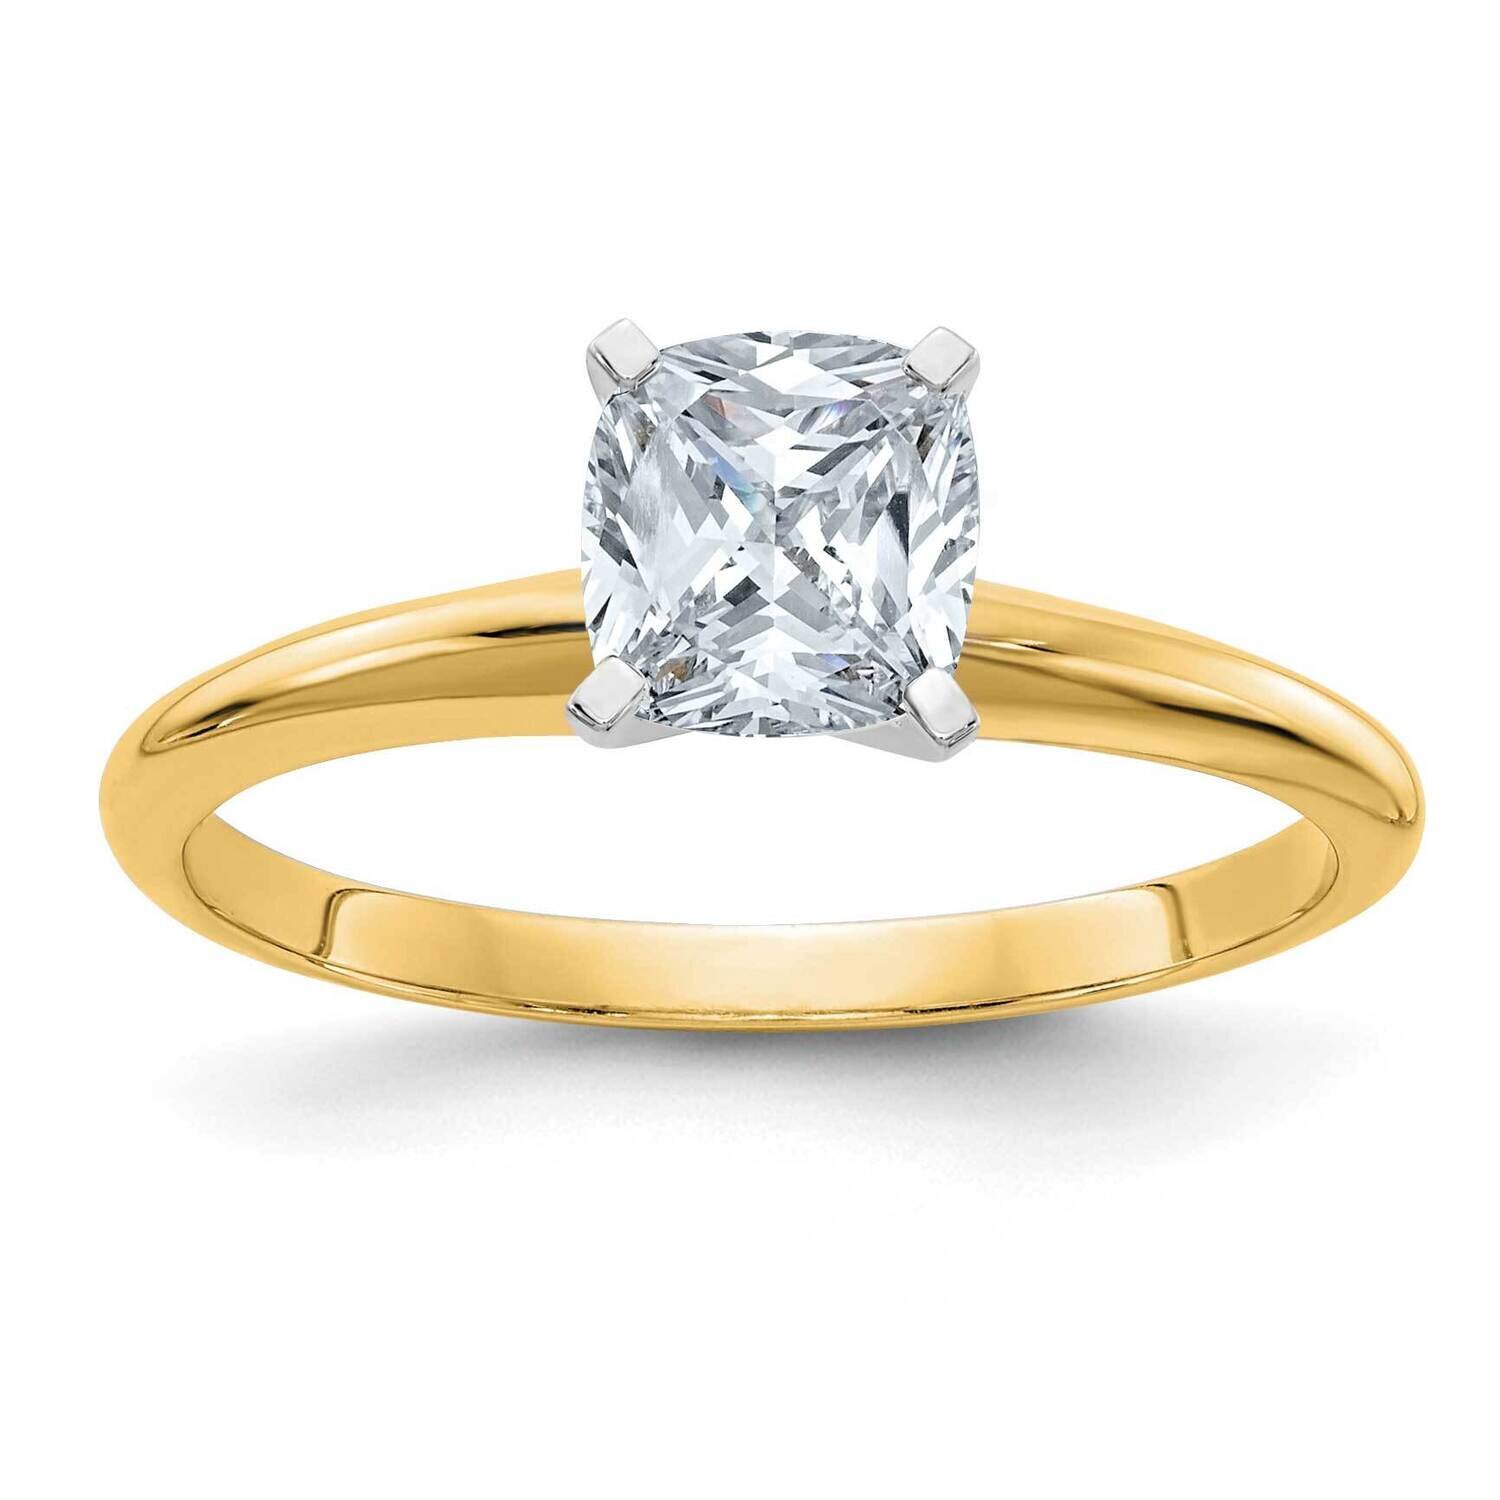 1ct. D E F Pure Light Cushion Moissanite Solitaire Ring 14k Gold YGSH13C-12MP-5